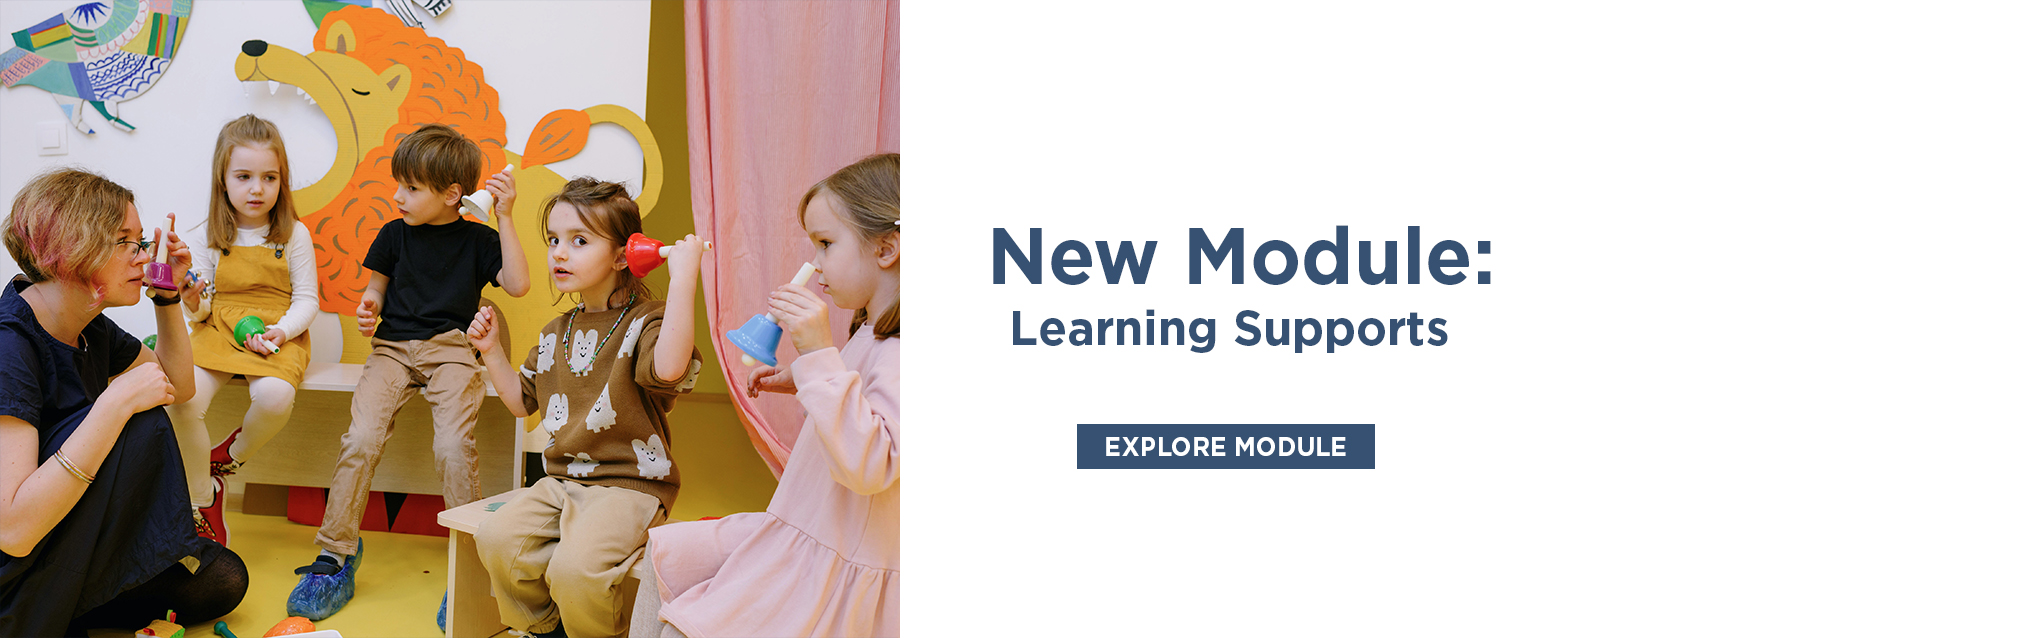 New Module: Learning Supports